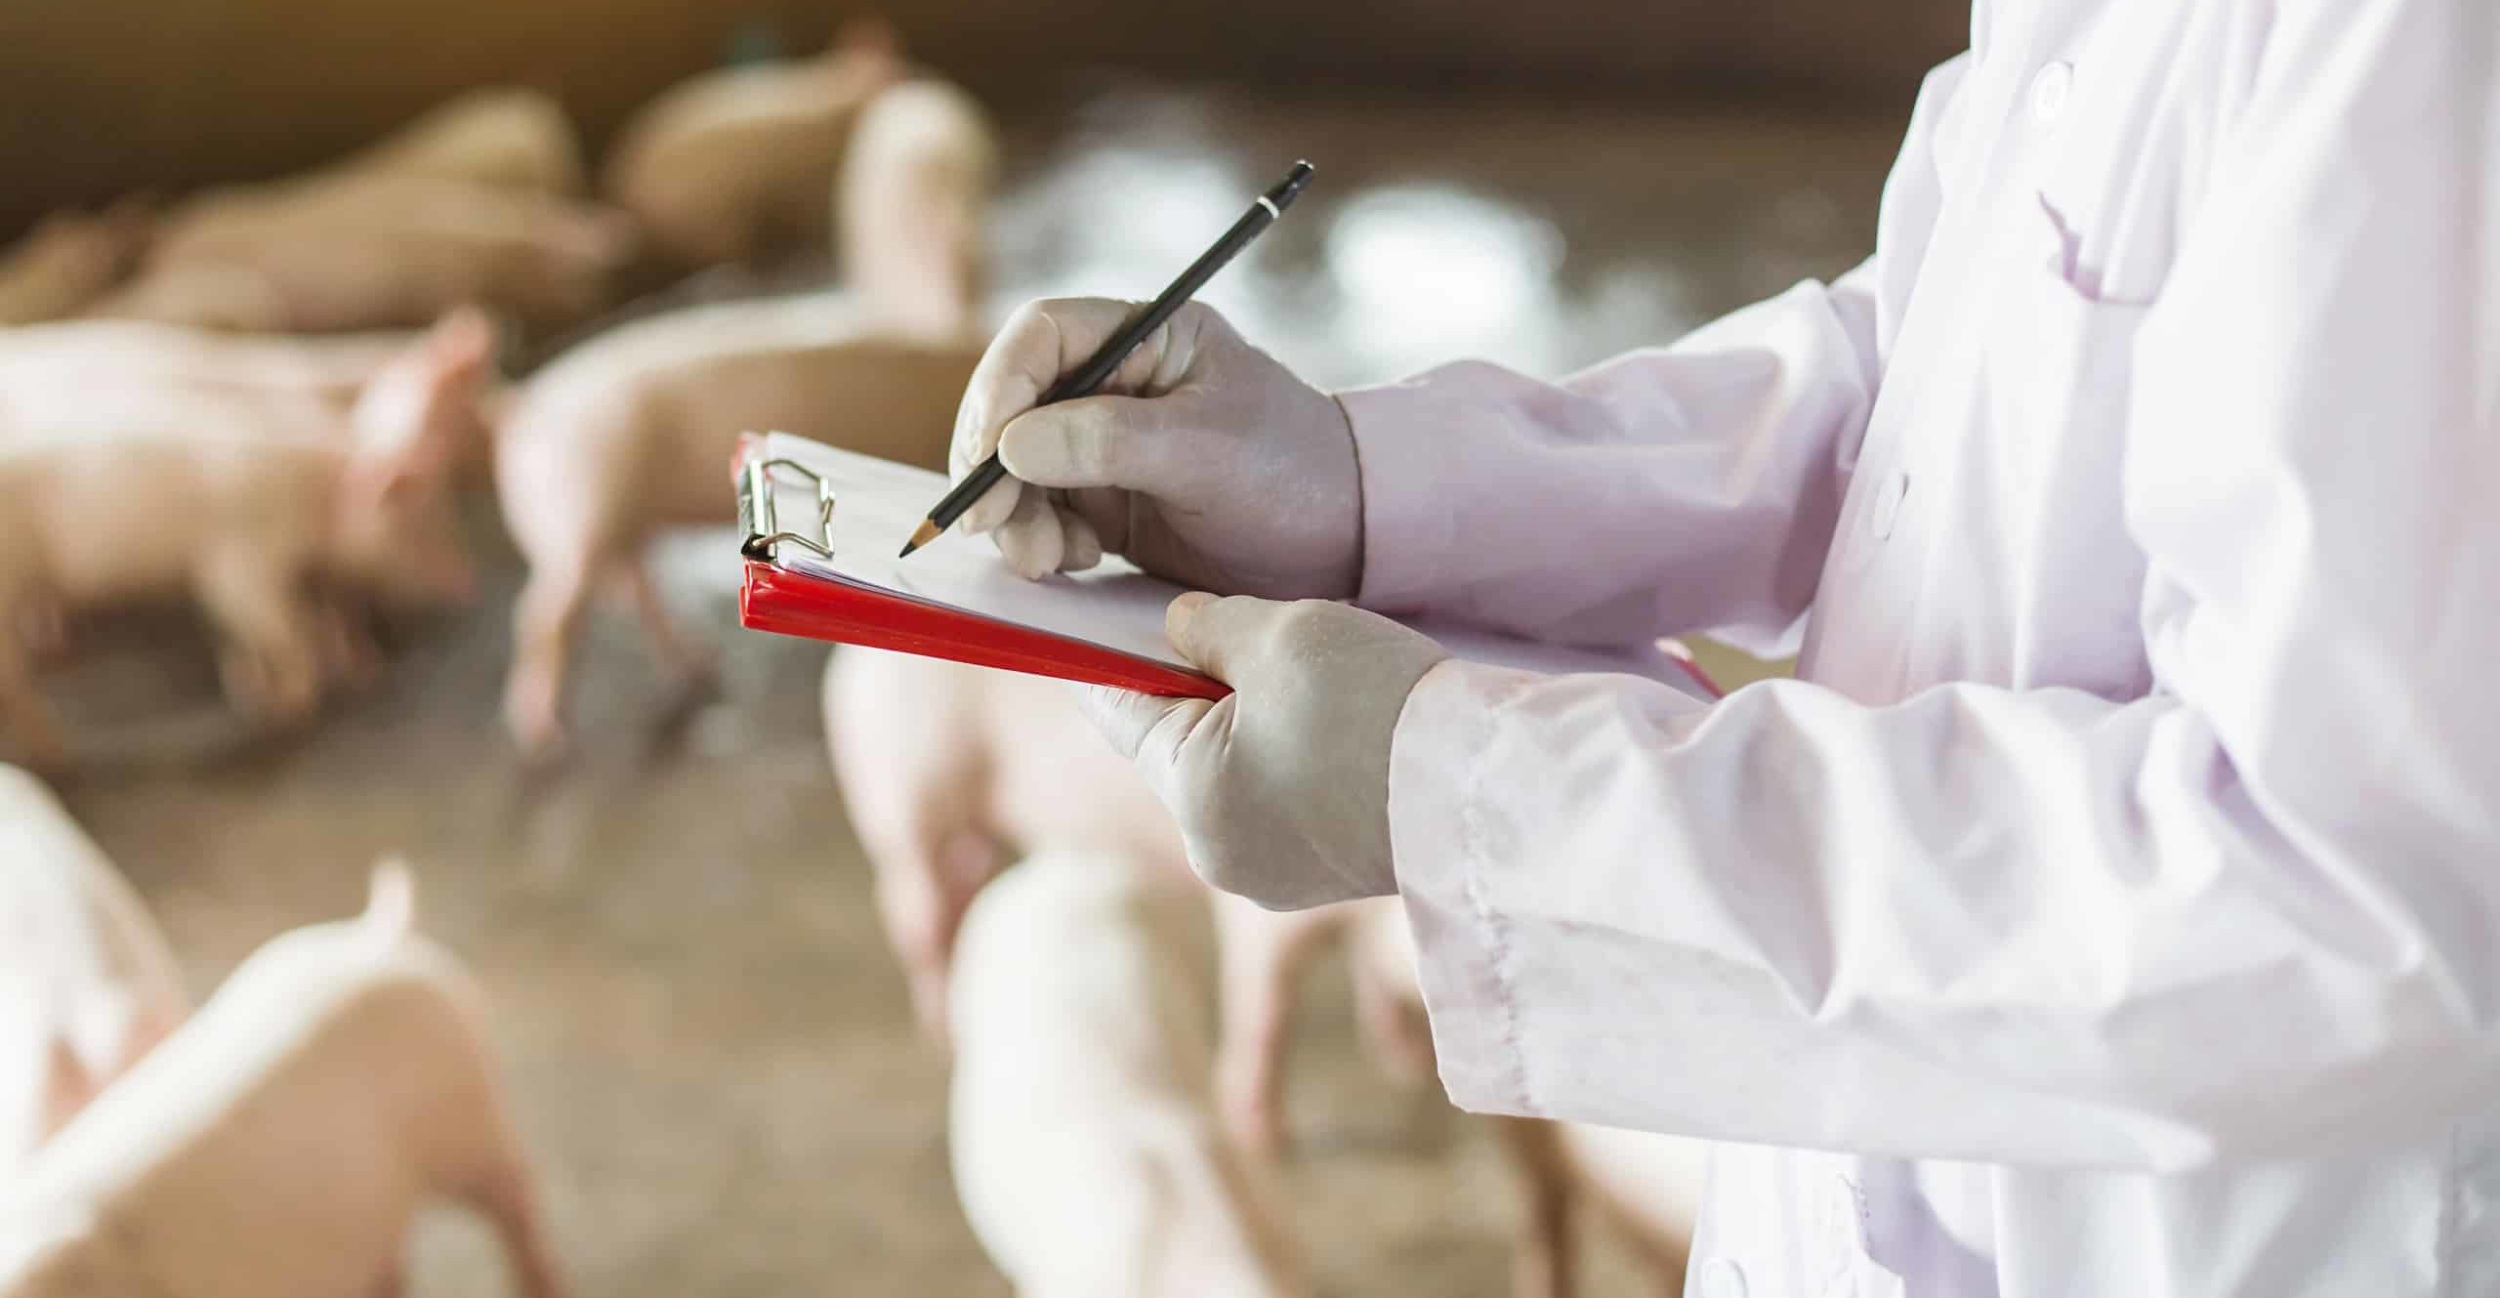 Alt= “Person in white lab coat taking notes on a clipboardstanding among young pigs in a building”